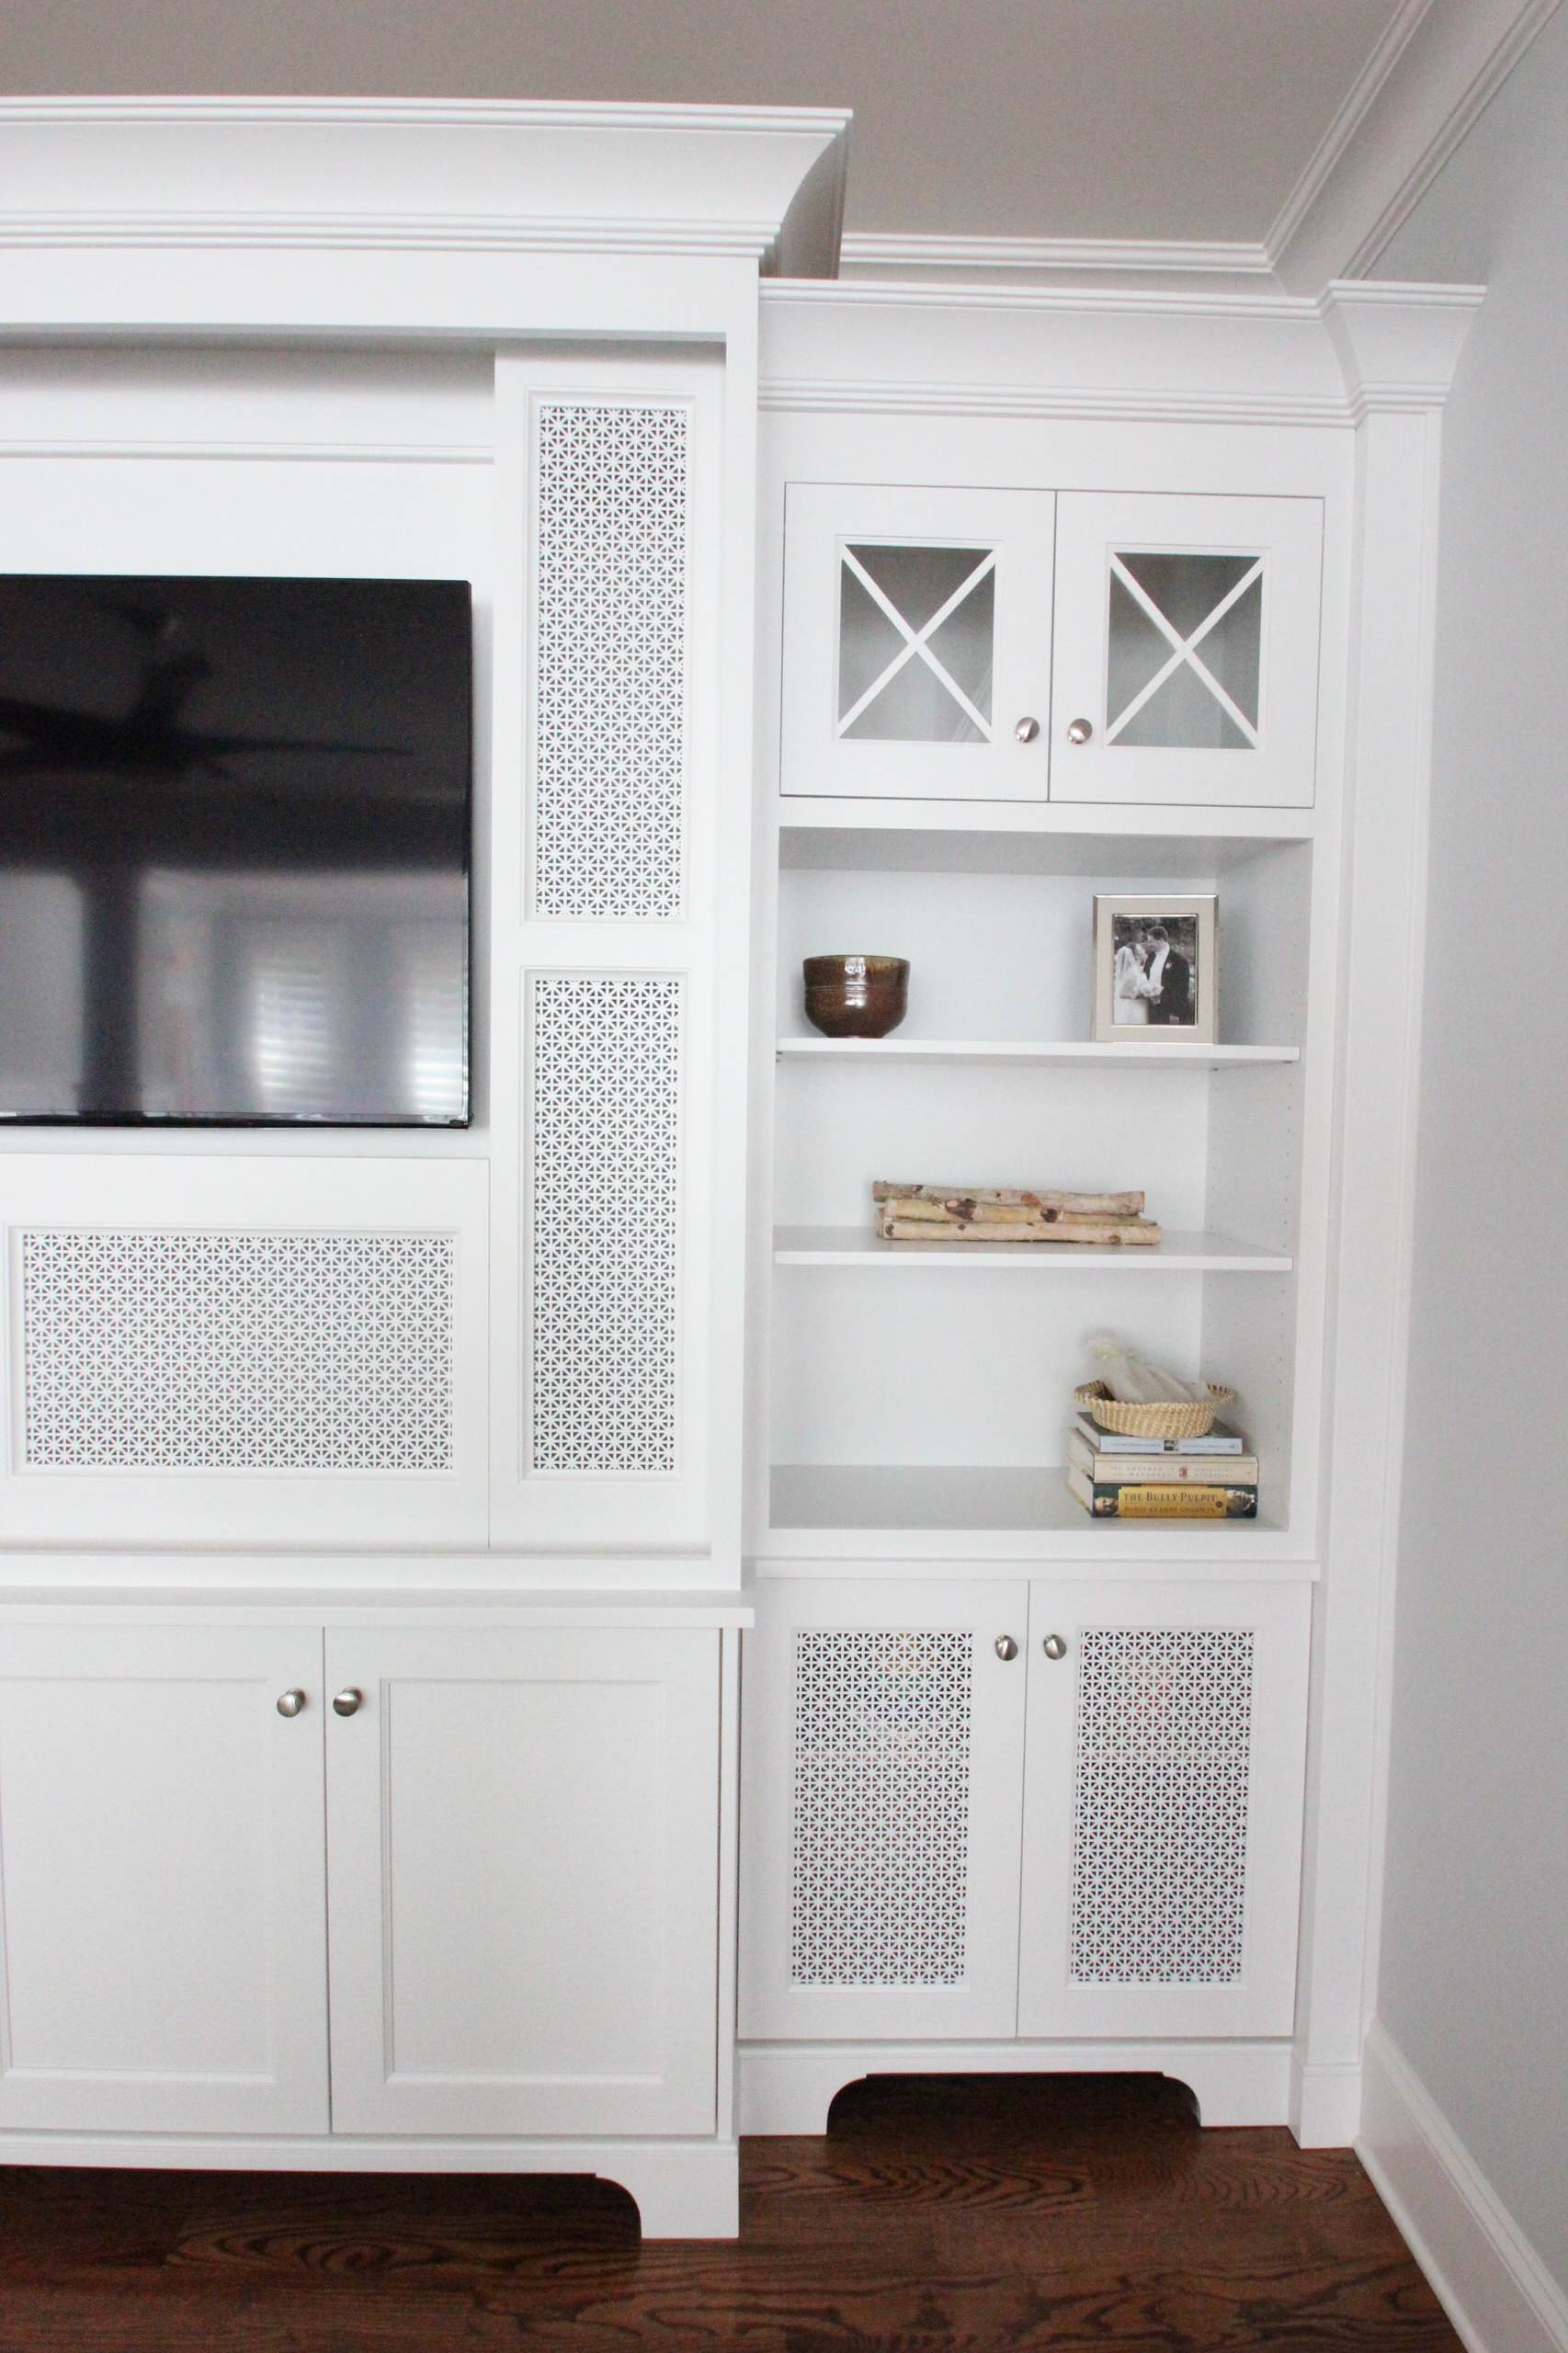 Mesh Front Media Cabinets - Photos & Ideas